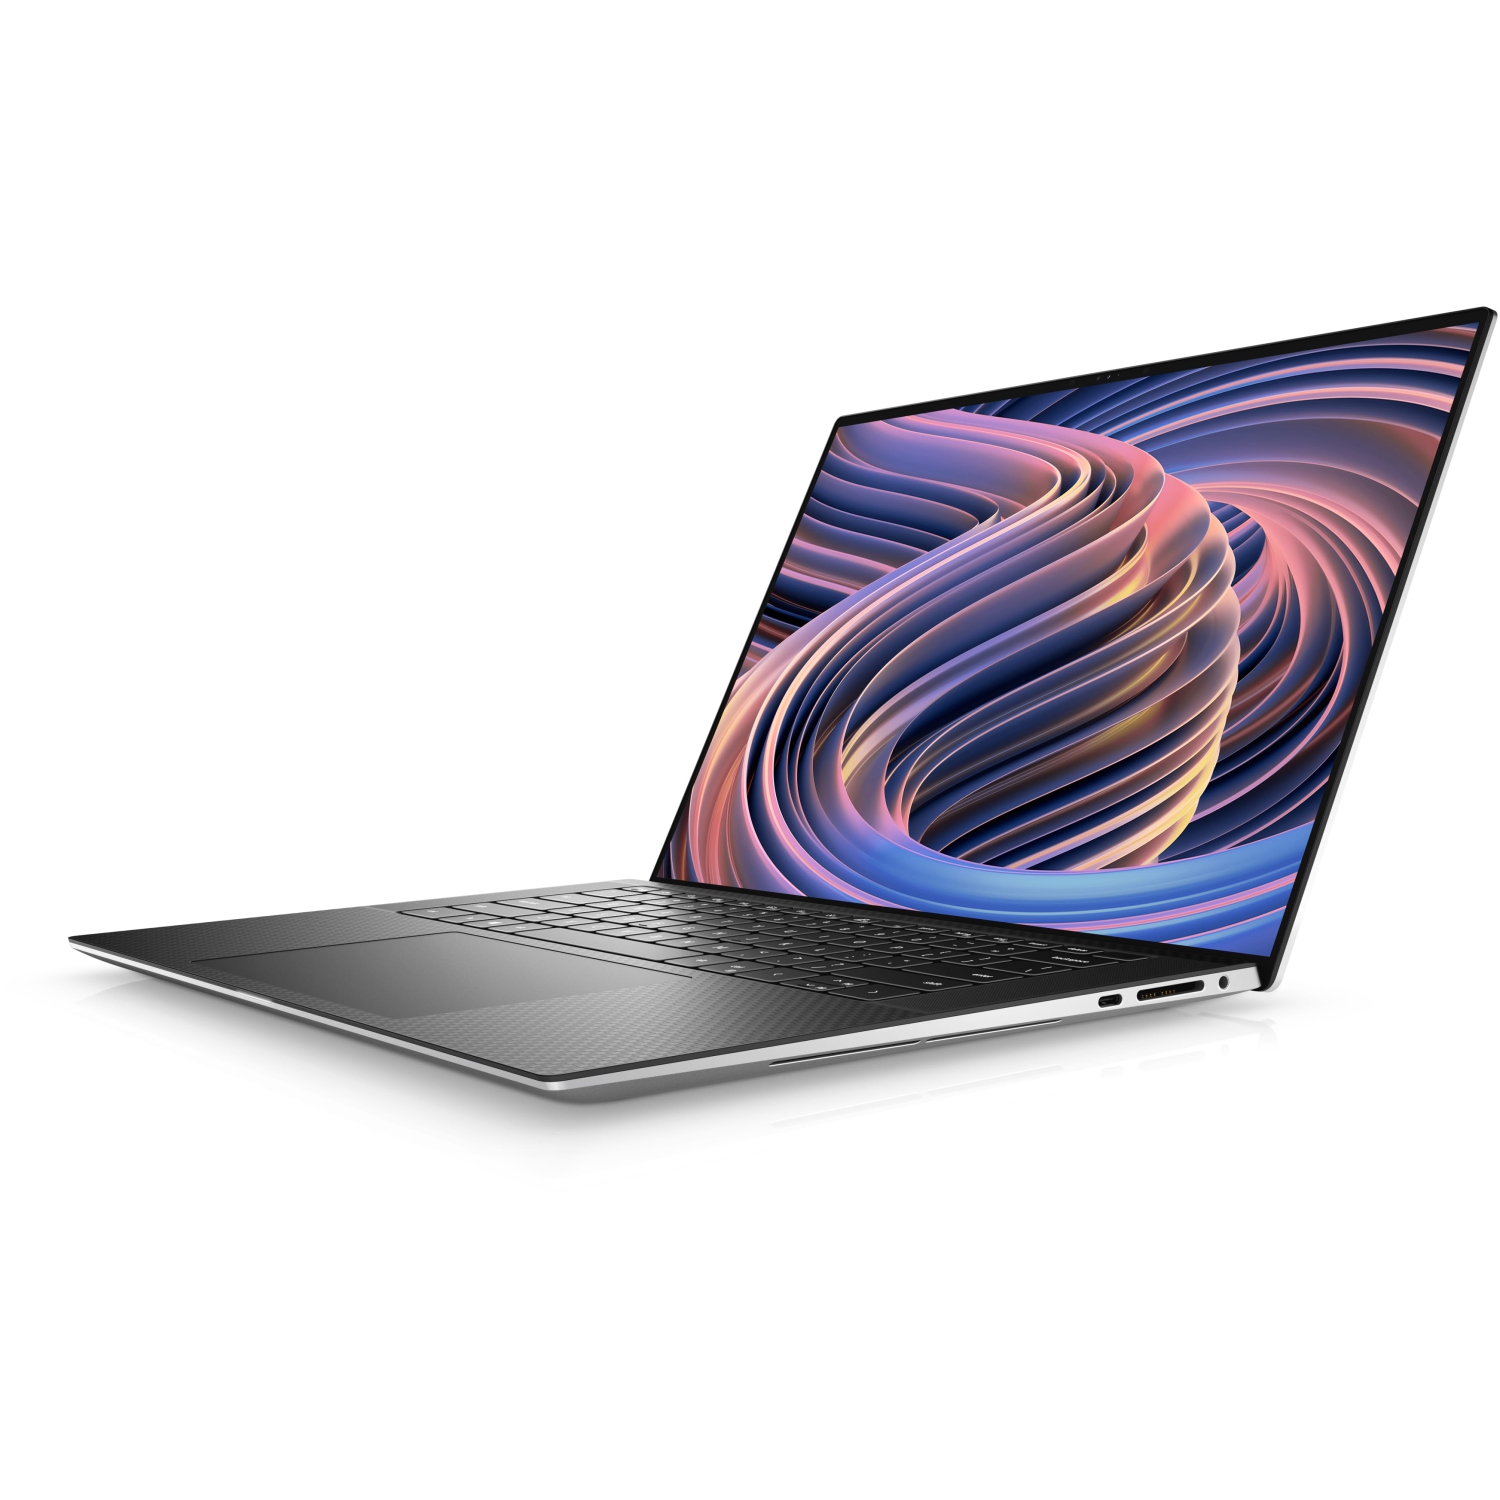 Refurbished (Excellent) – Dell XPS 9520 Laptop (2022) | 15.6" 4K Touch | Core i7 - 4TB SSD - 64GB RAM - RTX 3050 | 14 Cores @ 4.7 GHz - 12th Gen CPU